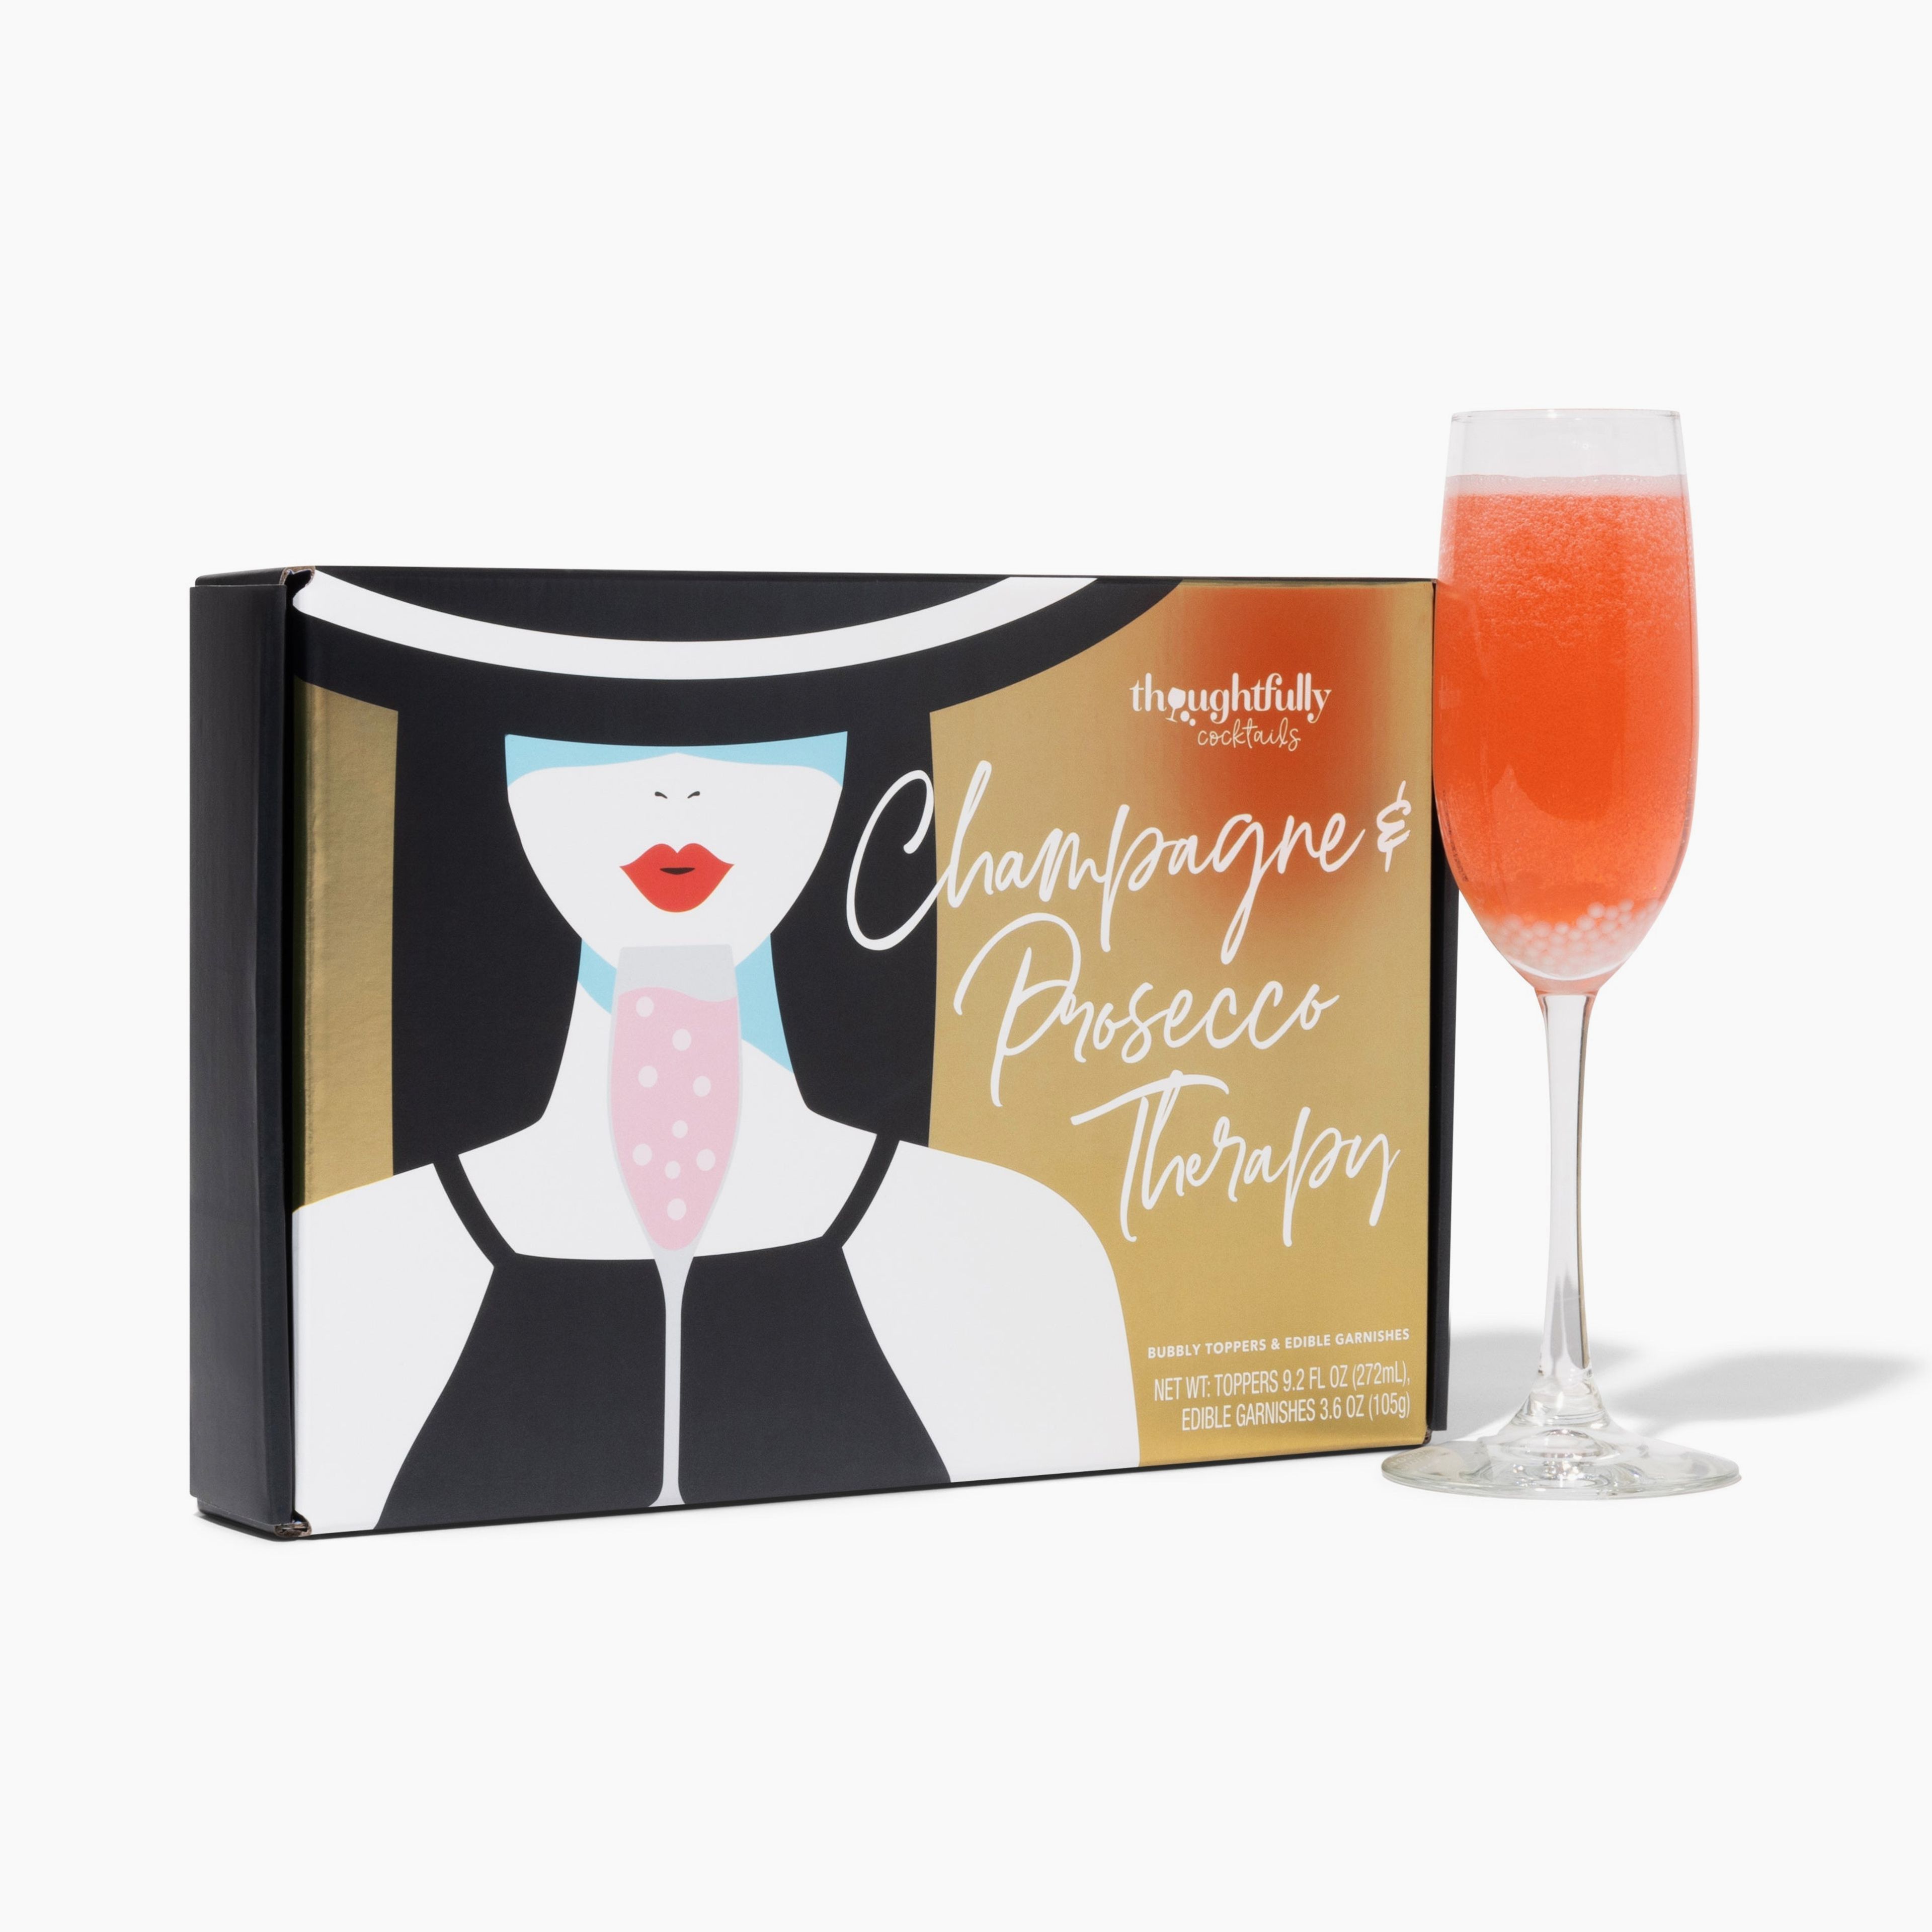 Champagne and Prosecco Therapy Cocktail Gift Set